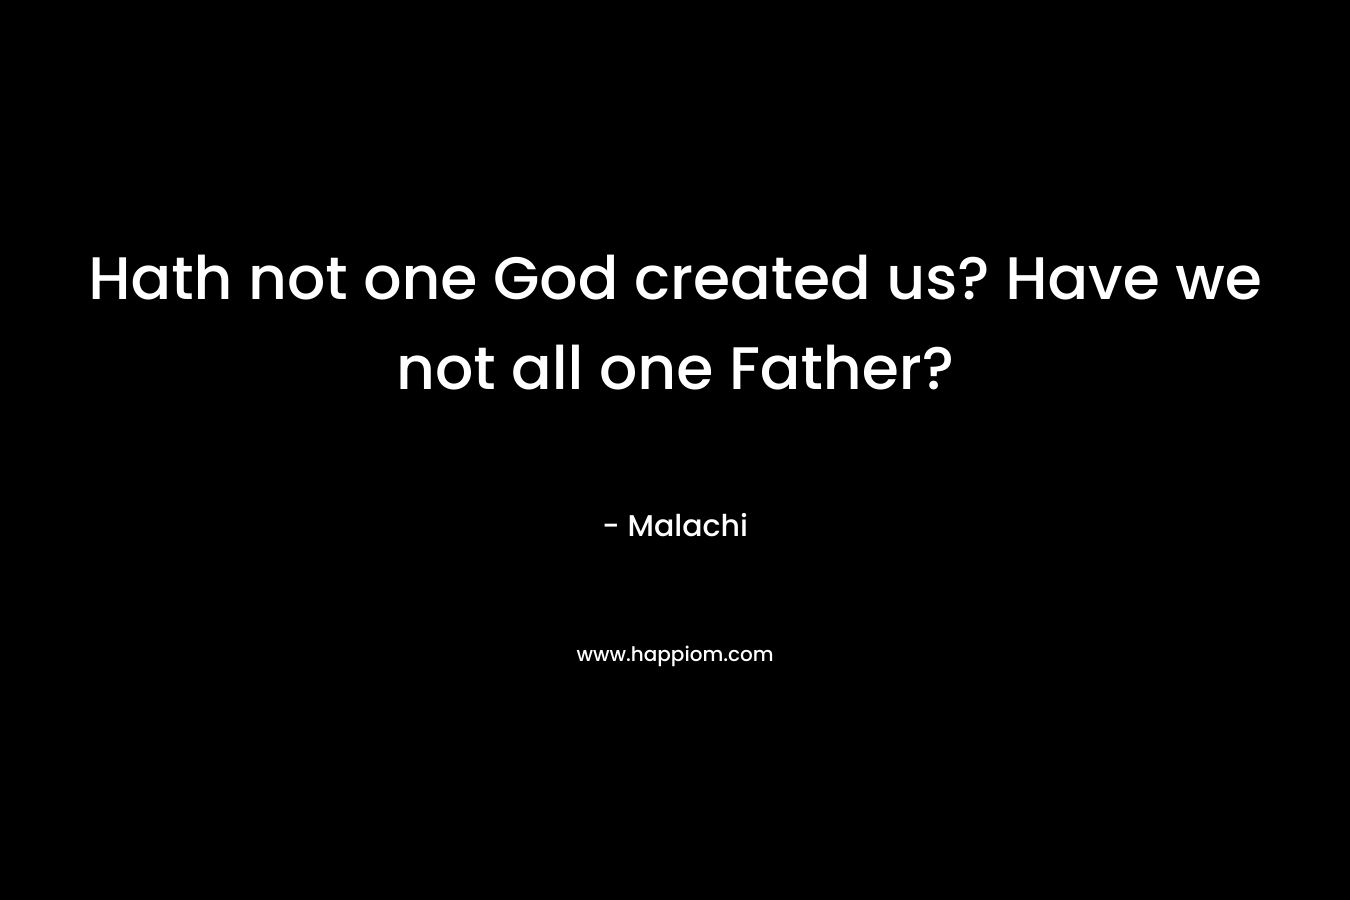 Hath not one God created us? Have we not all one Father?